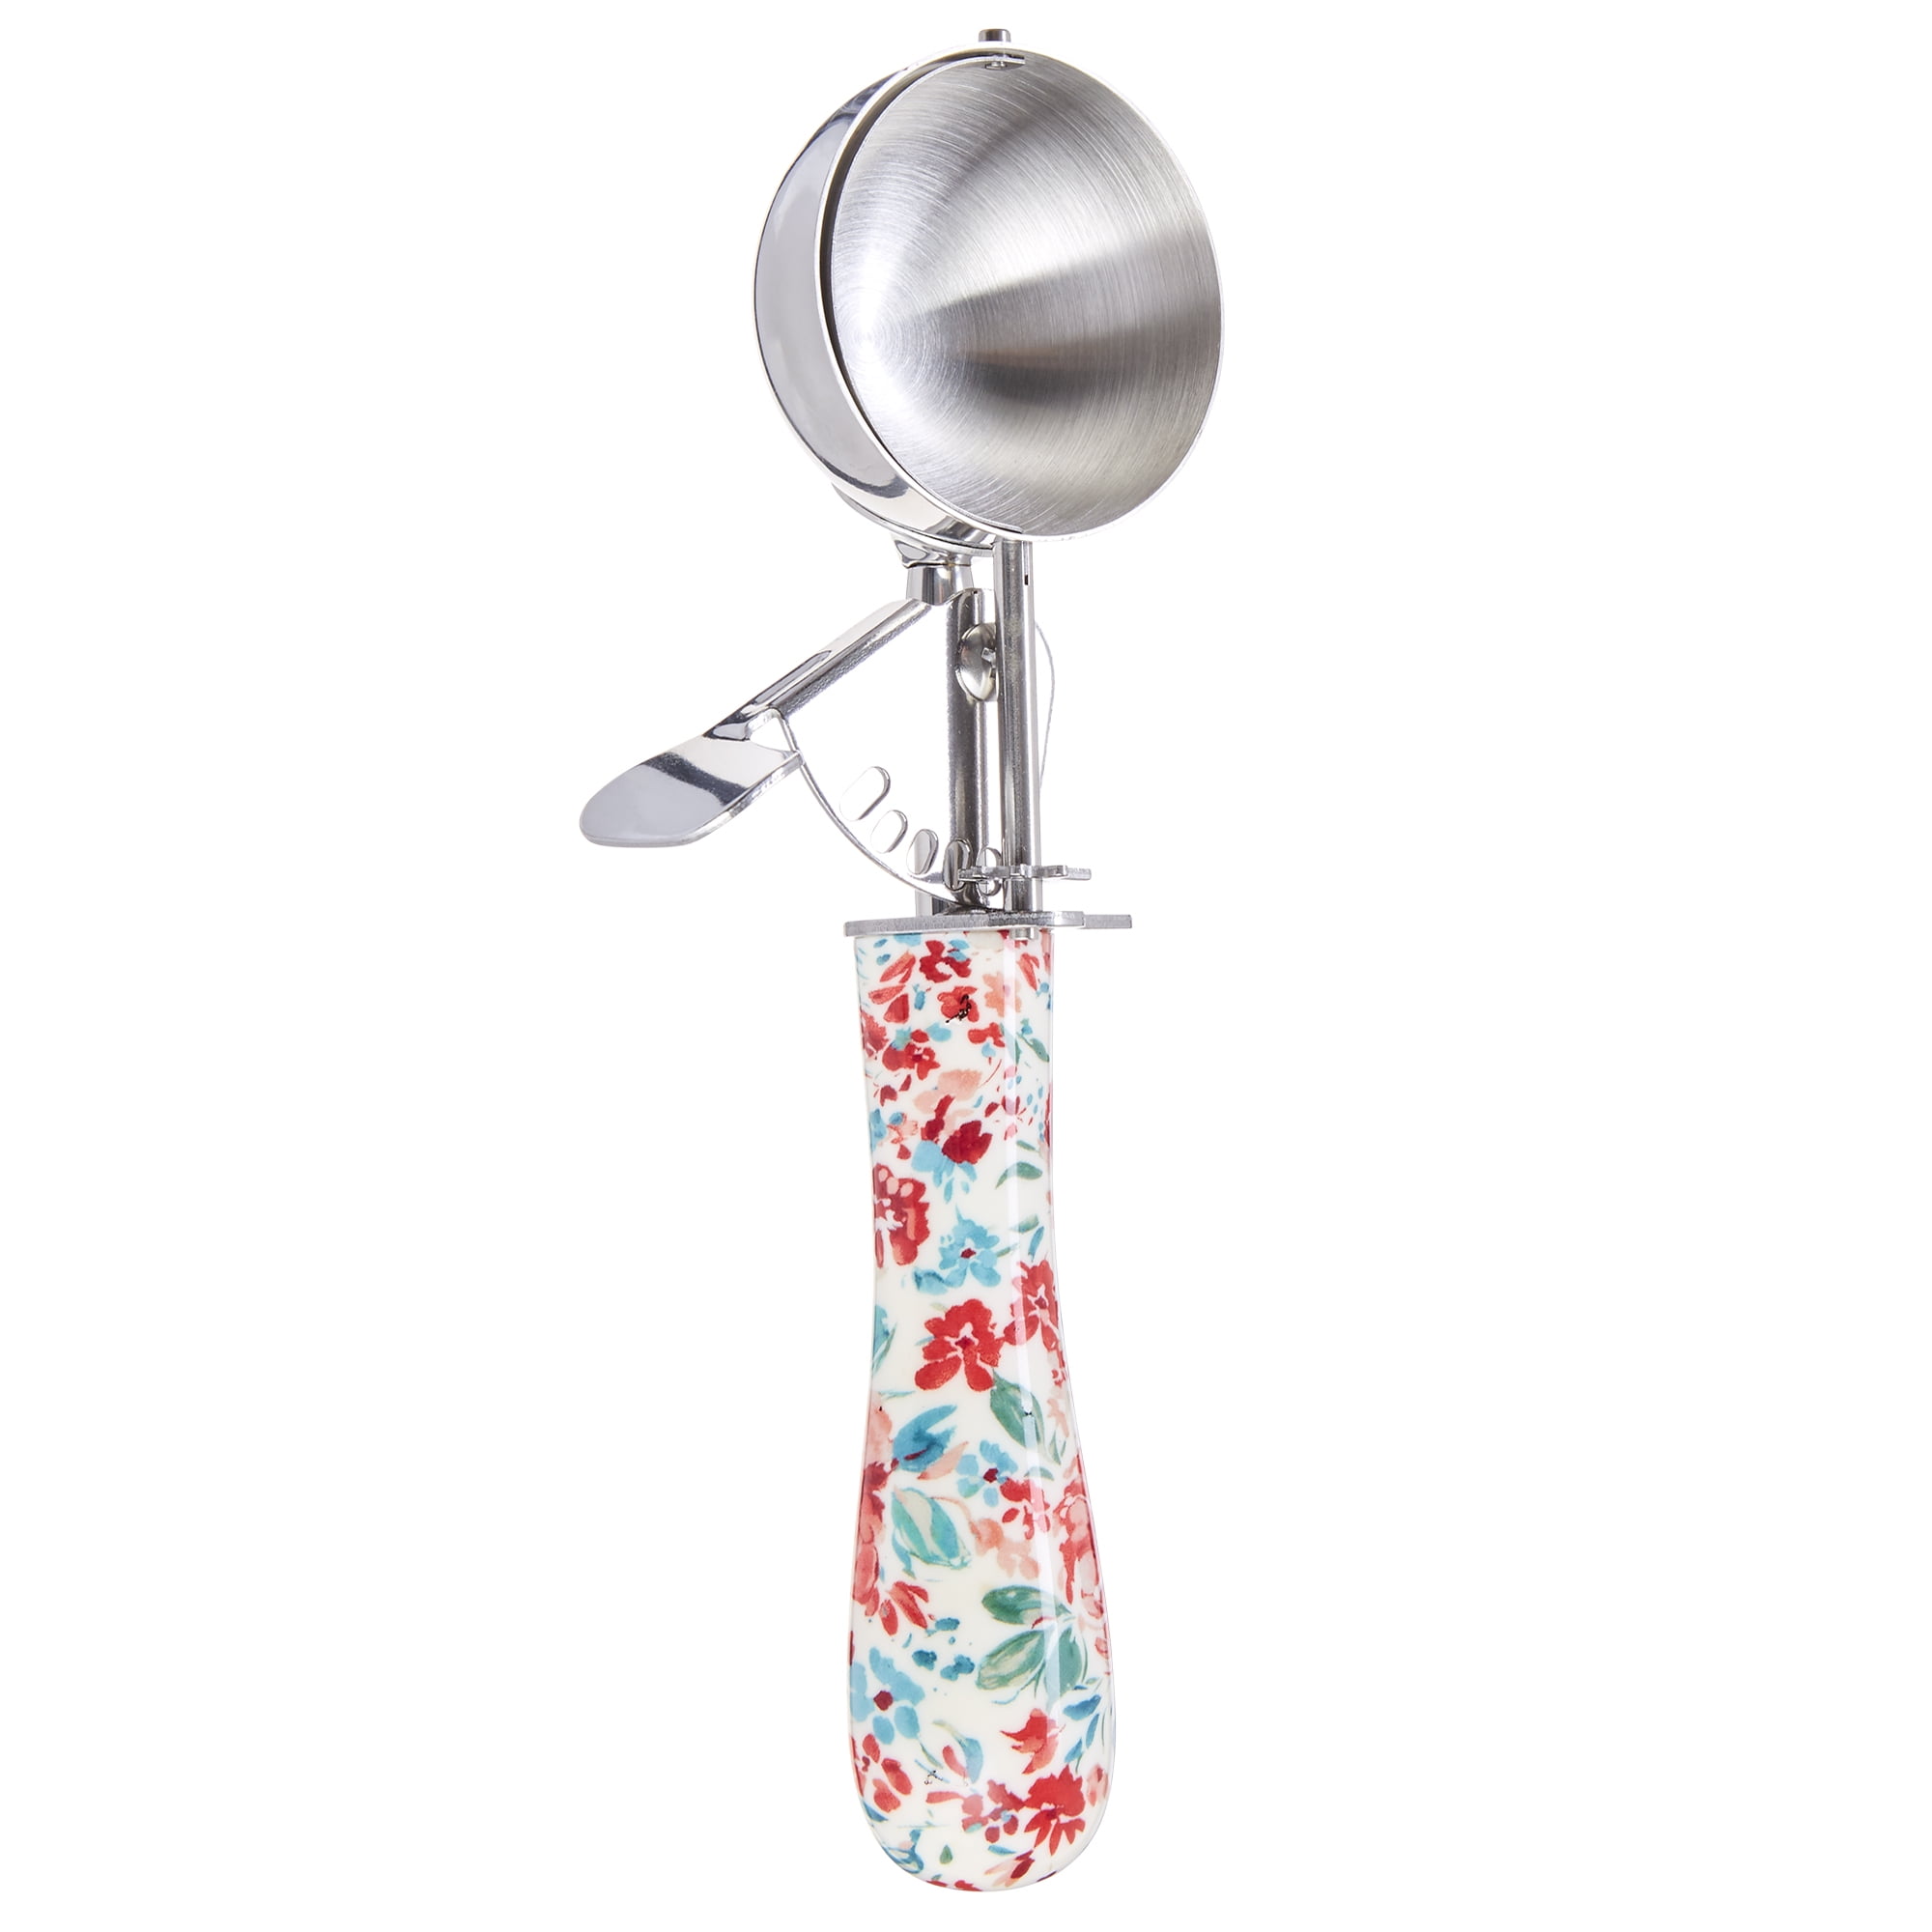 The Pioneer Woman Gorgeous Garden Stainless Steel Trigger Ice Cream Scoop